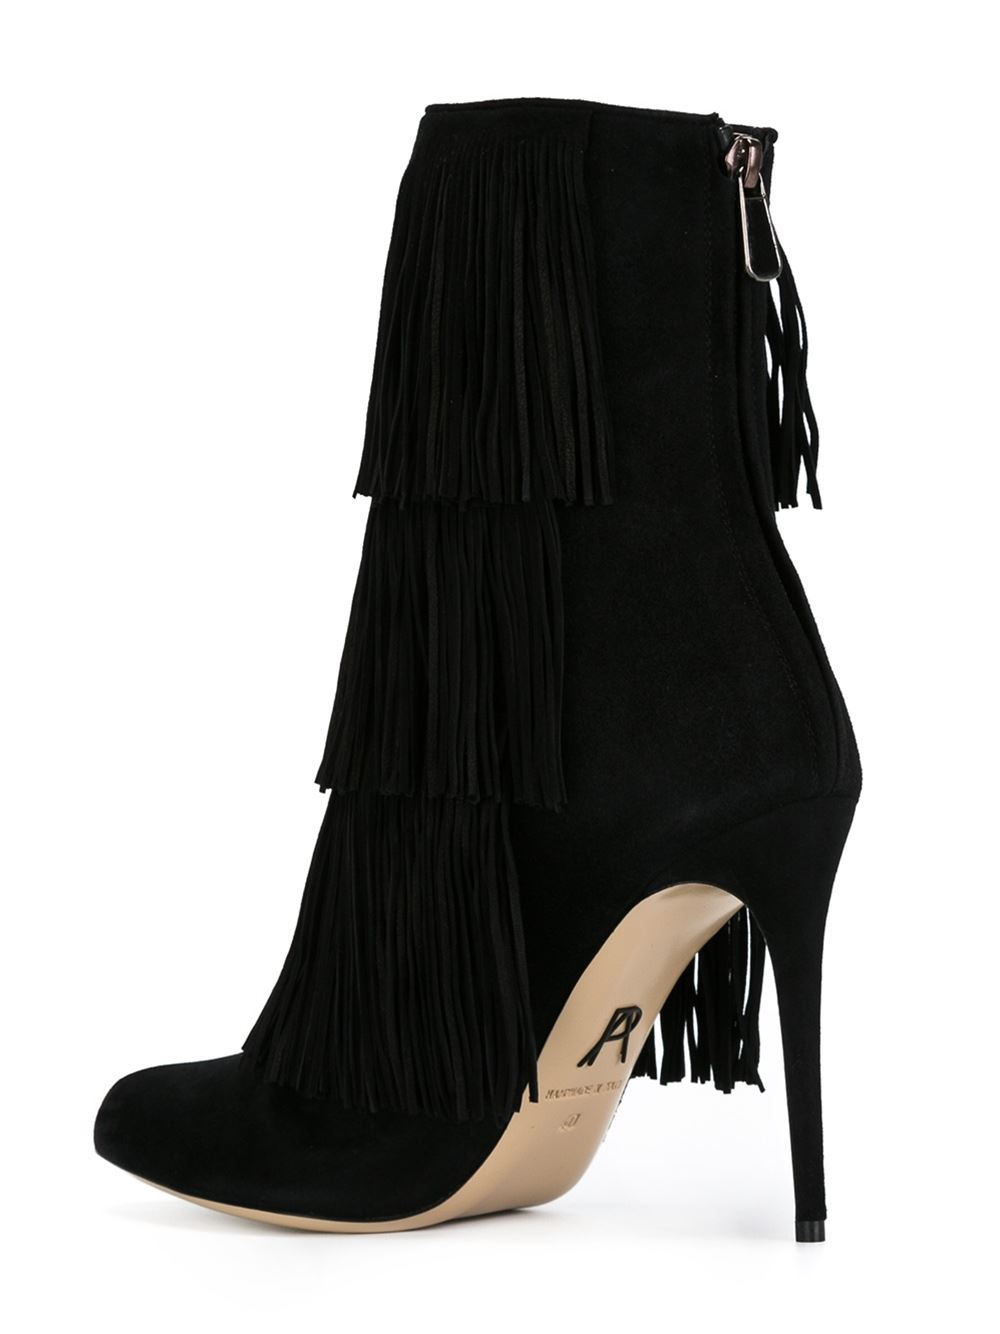 Lyst - Paul Andrew Taos Fringed Suede Ankle Boots in Black